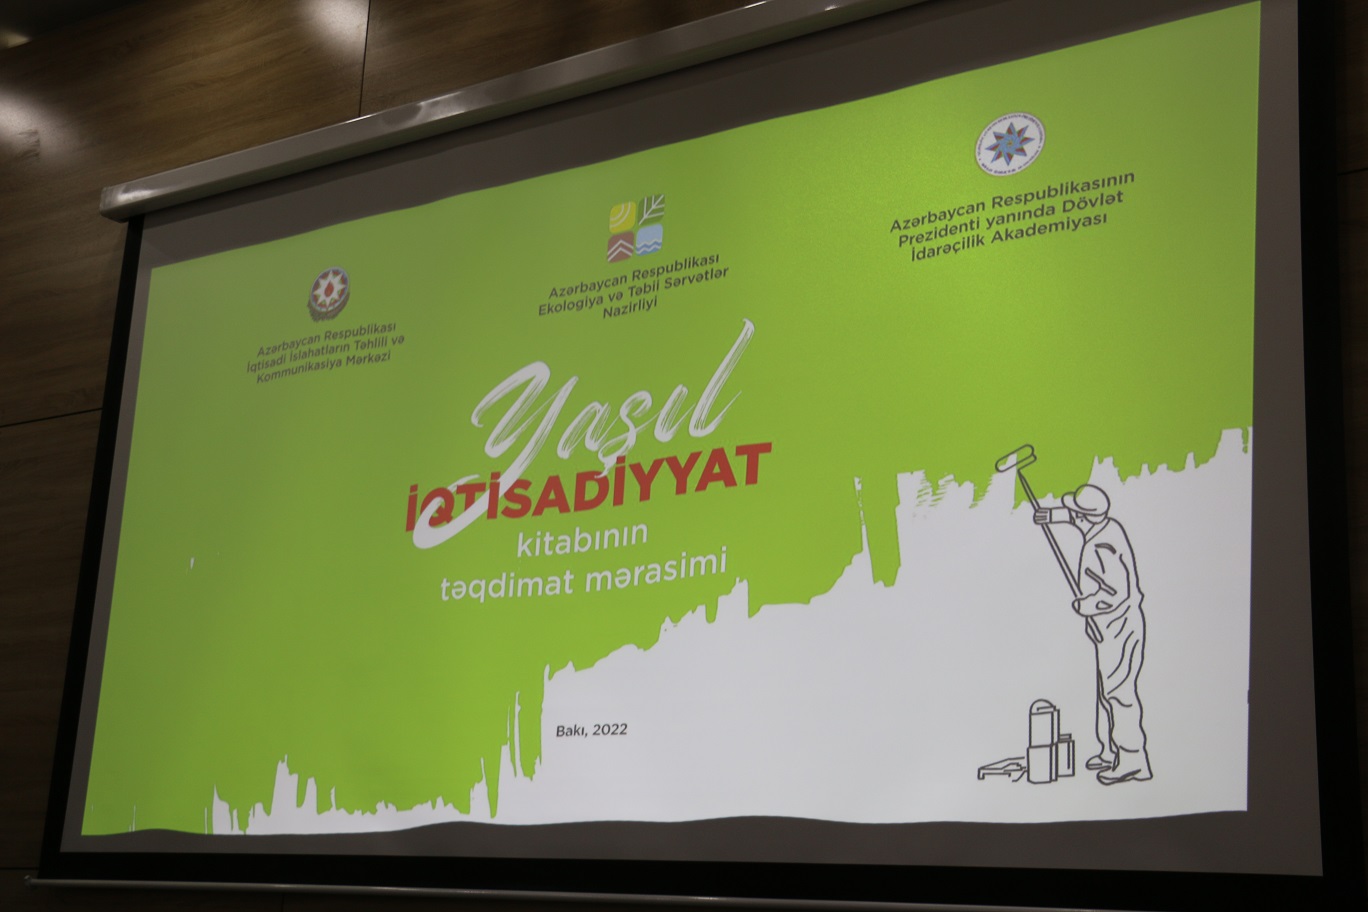 The presentation of the "Green Economy" monograph was held